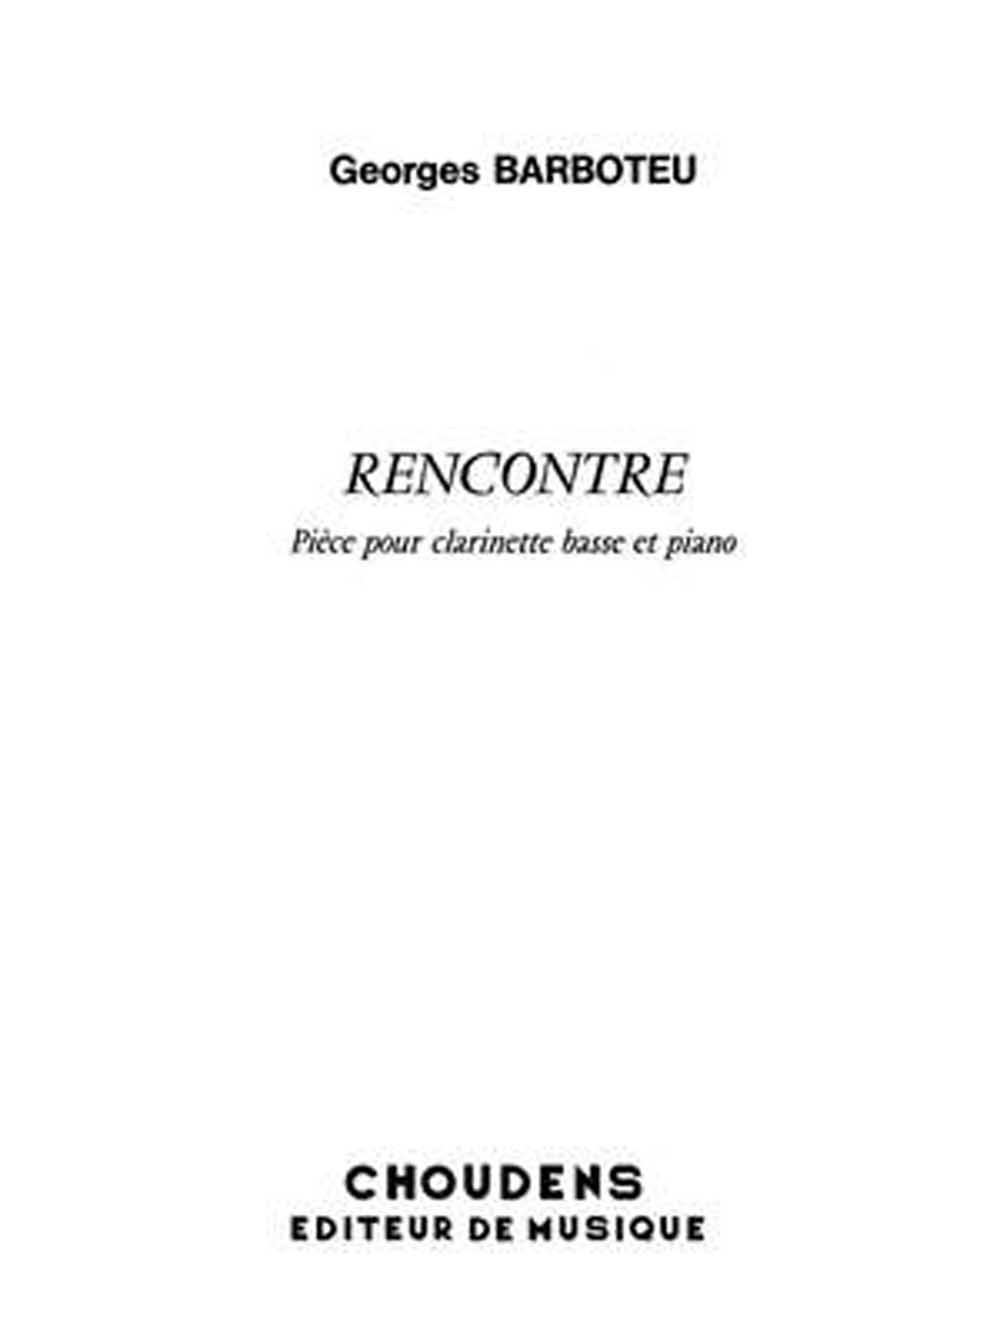 Georges Barboteu: Rencontre